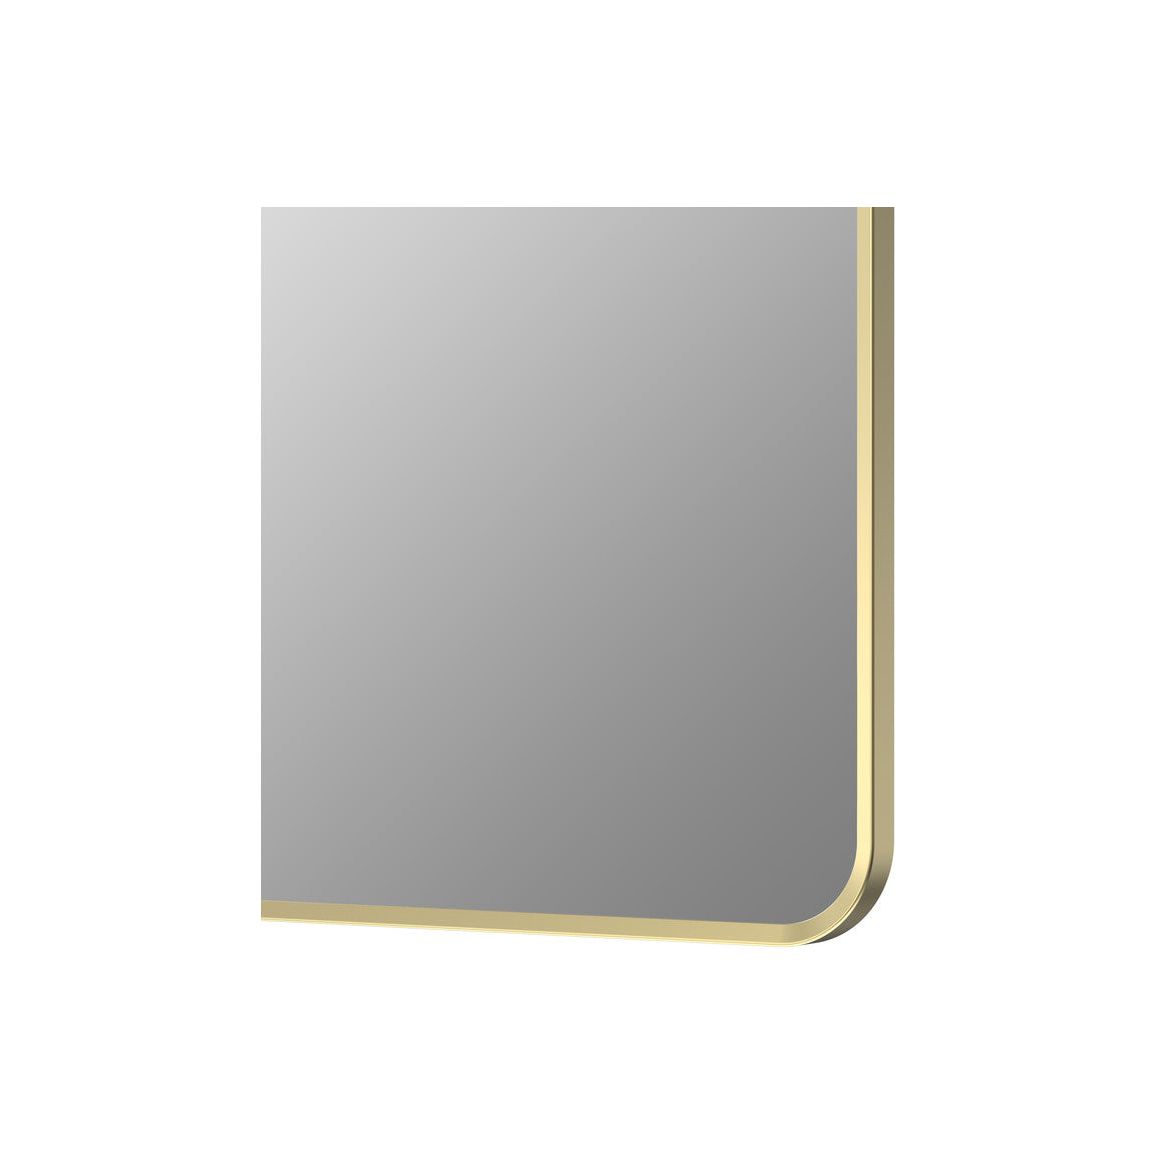 Sangha 600x800mm Rectangle Mirror - Brushed Brass